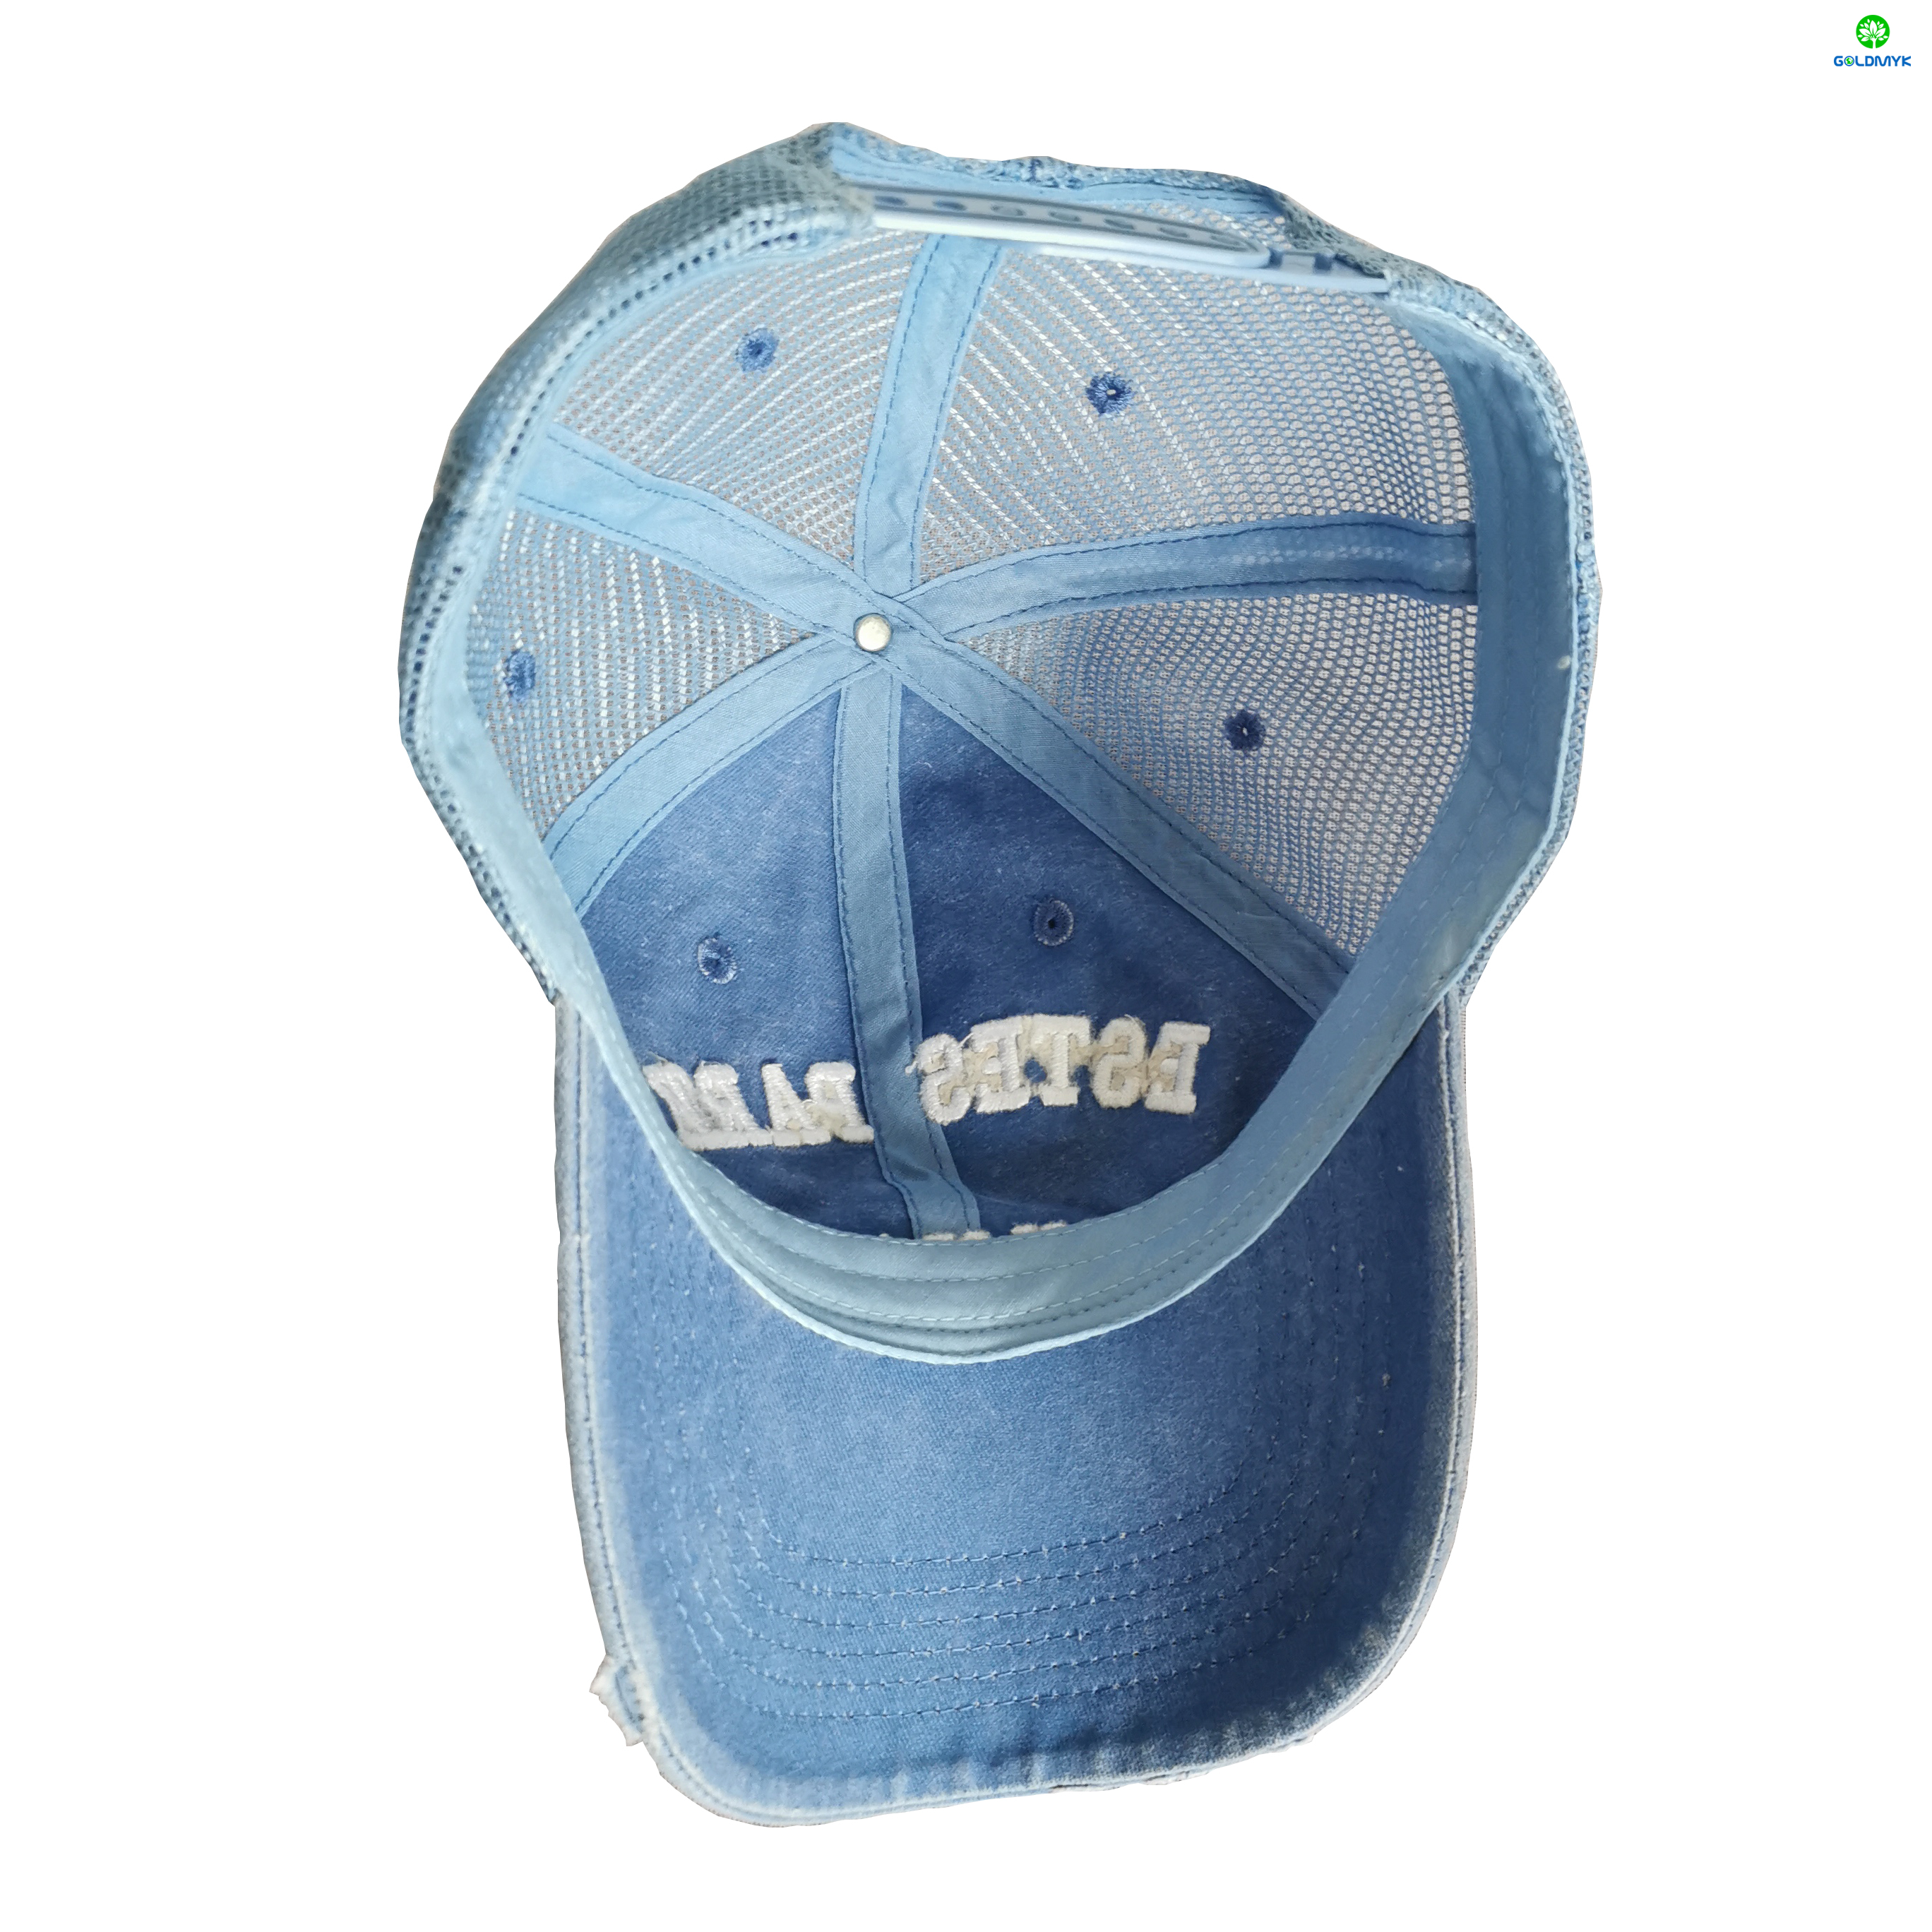 3D Embroidery Pigment Washed Mesh Cap With Distressed Visor